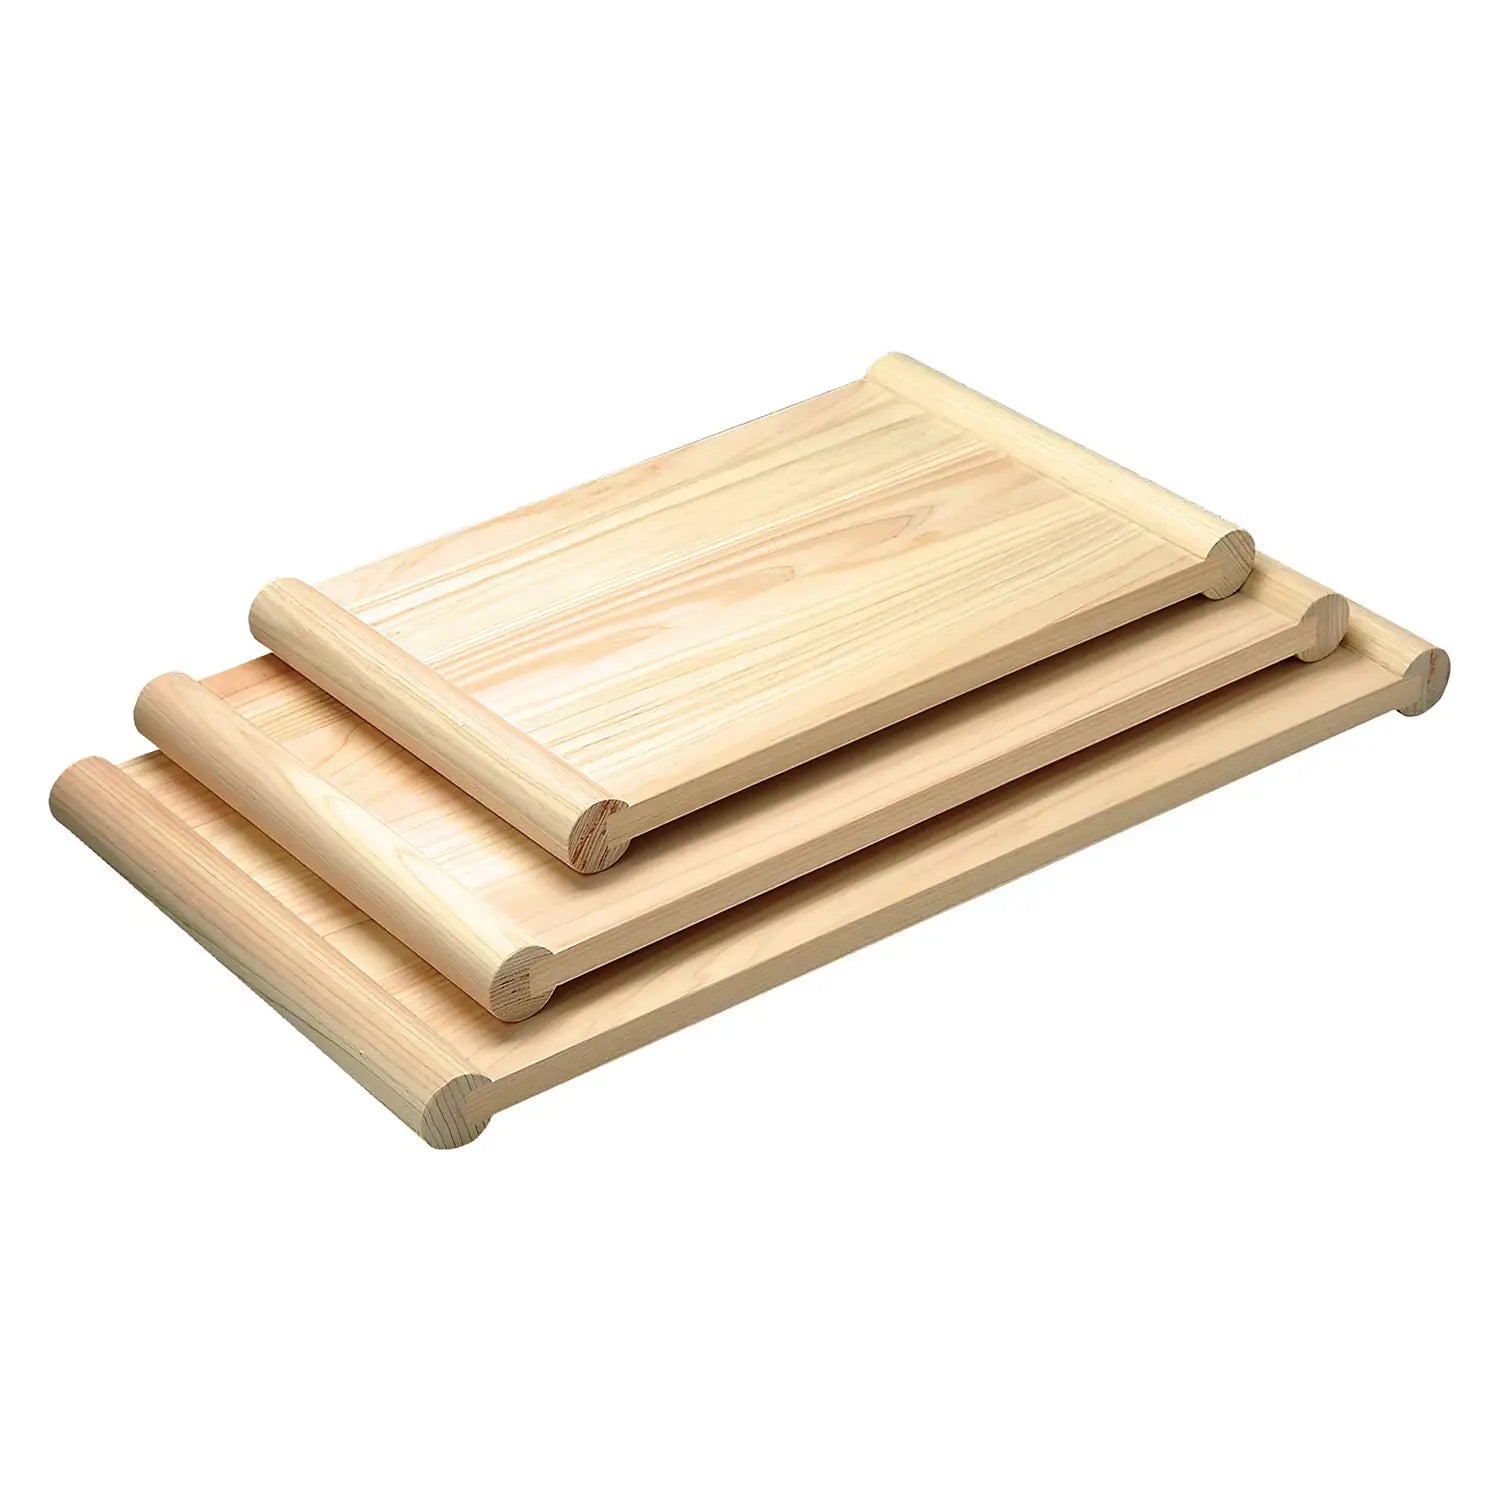 Parker Asahi Cookin' Cut Synthetic Rubber Color Cutting Board -  Globalkitchen Japan